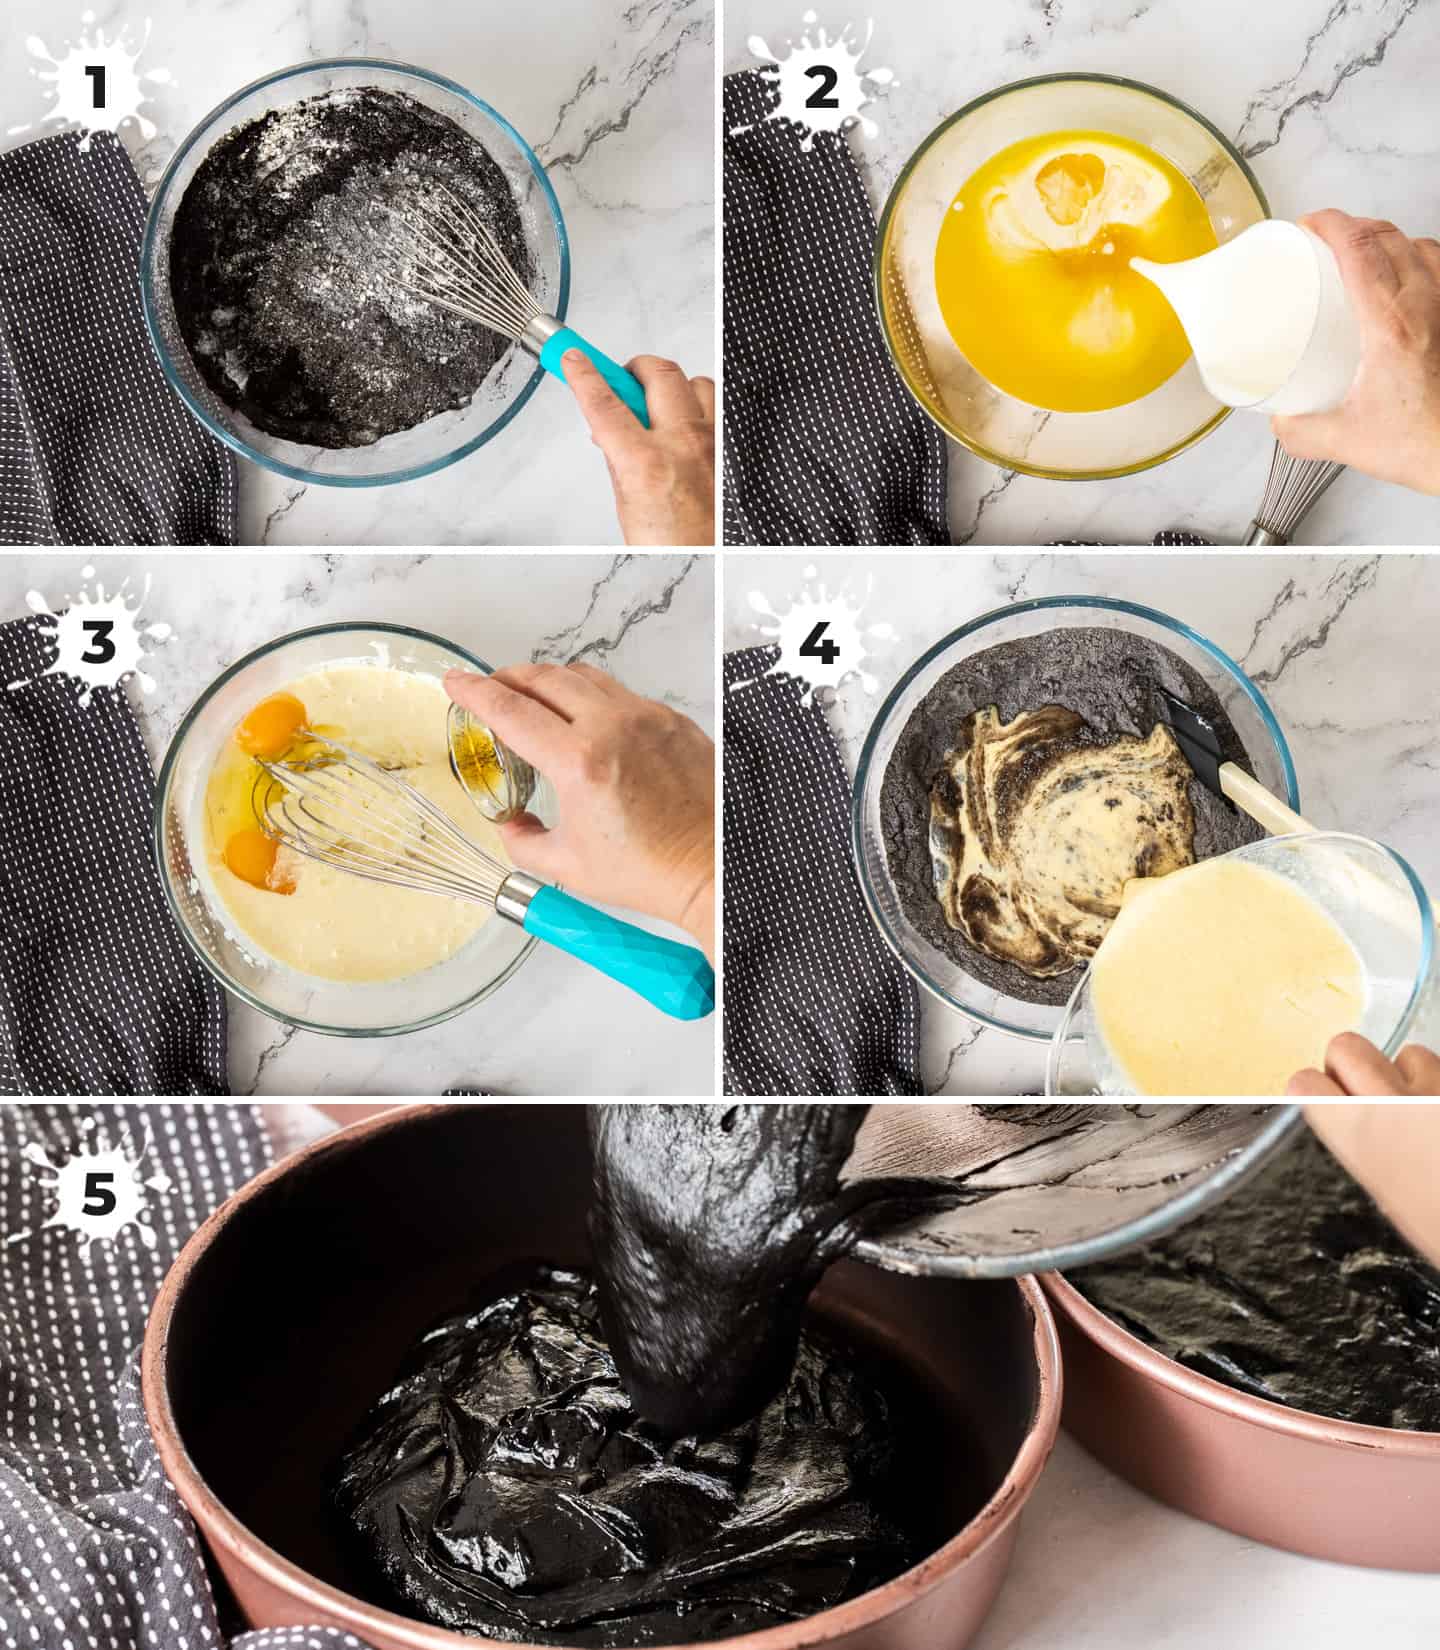 A collage of 5 images showing how to make the cake batter.